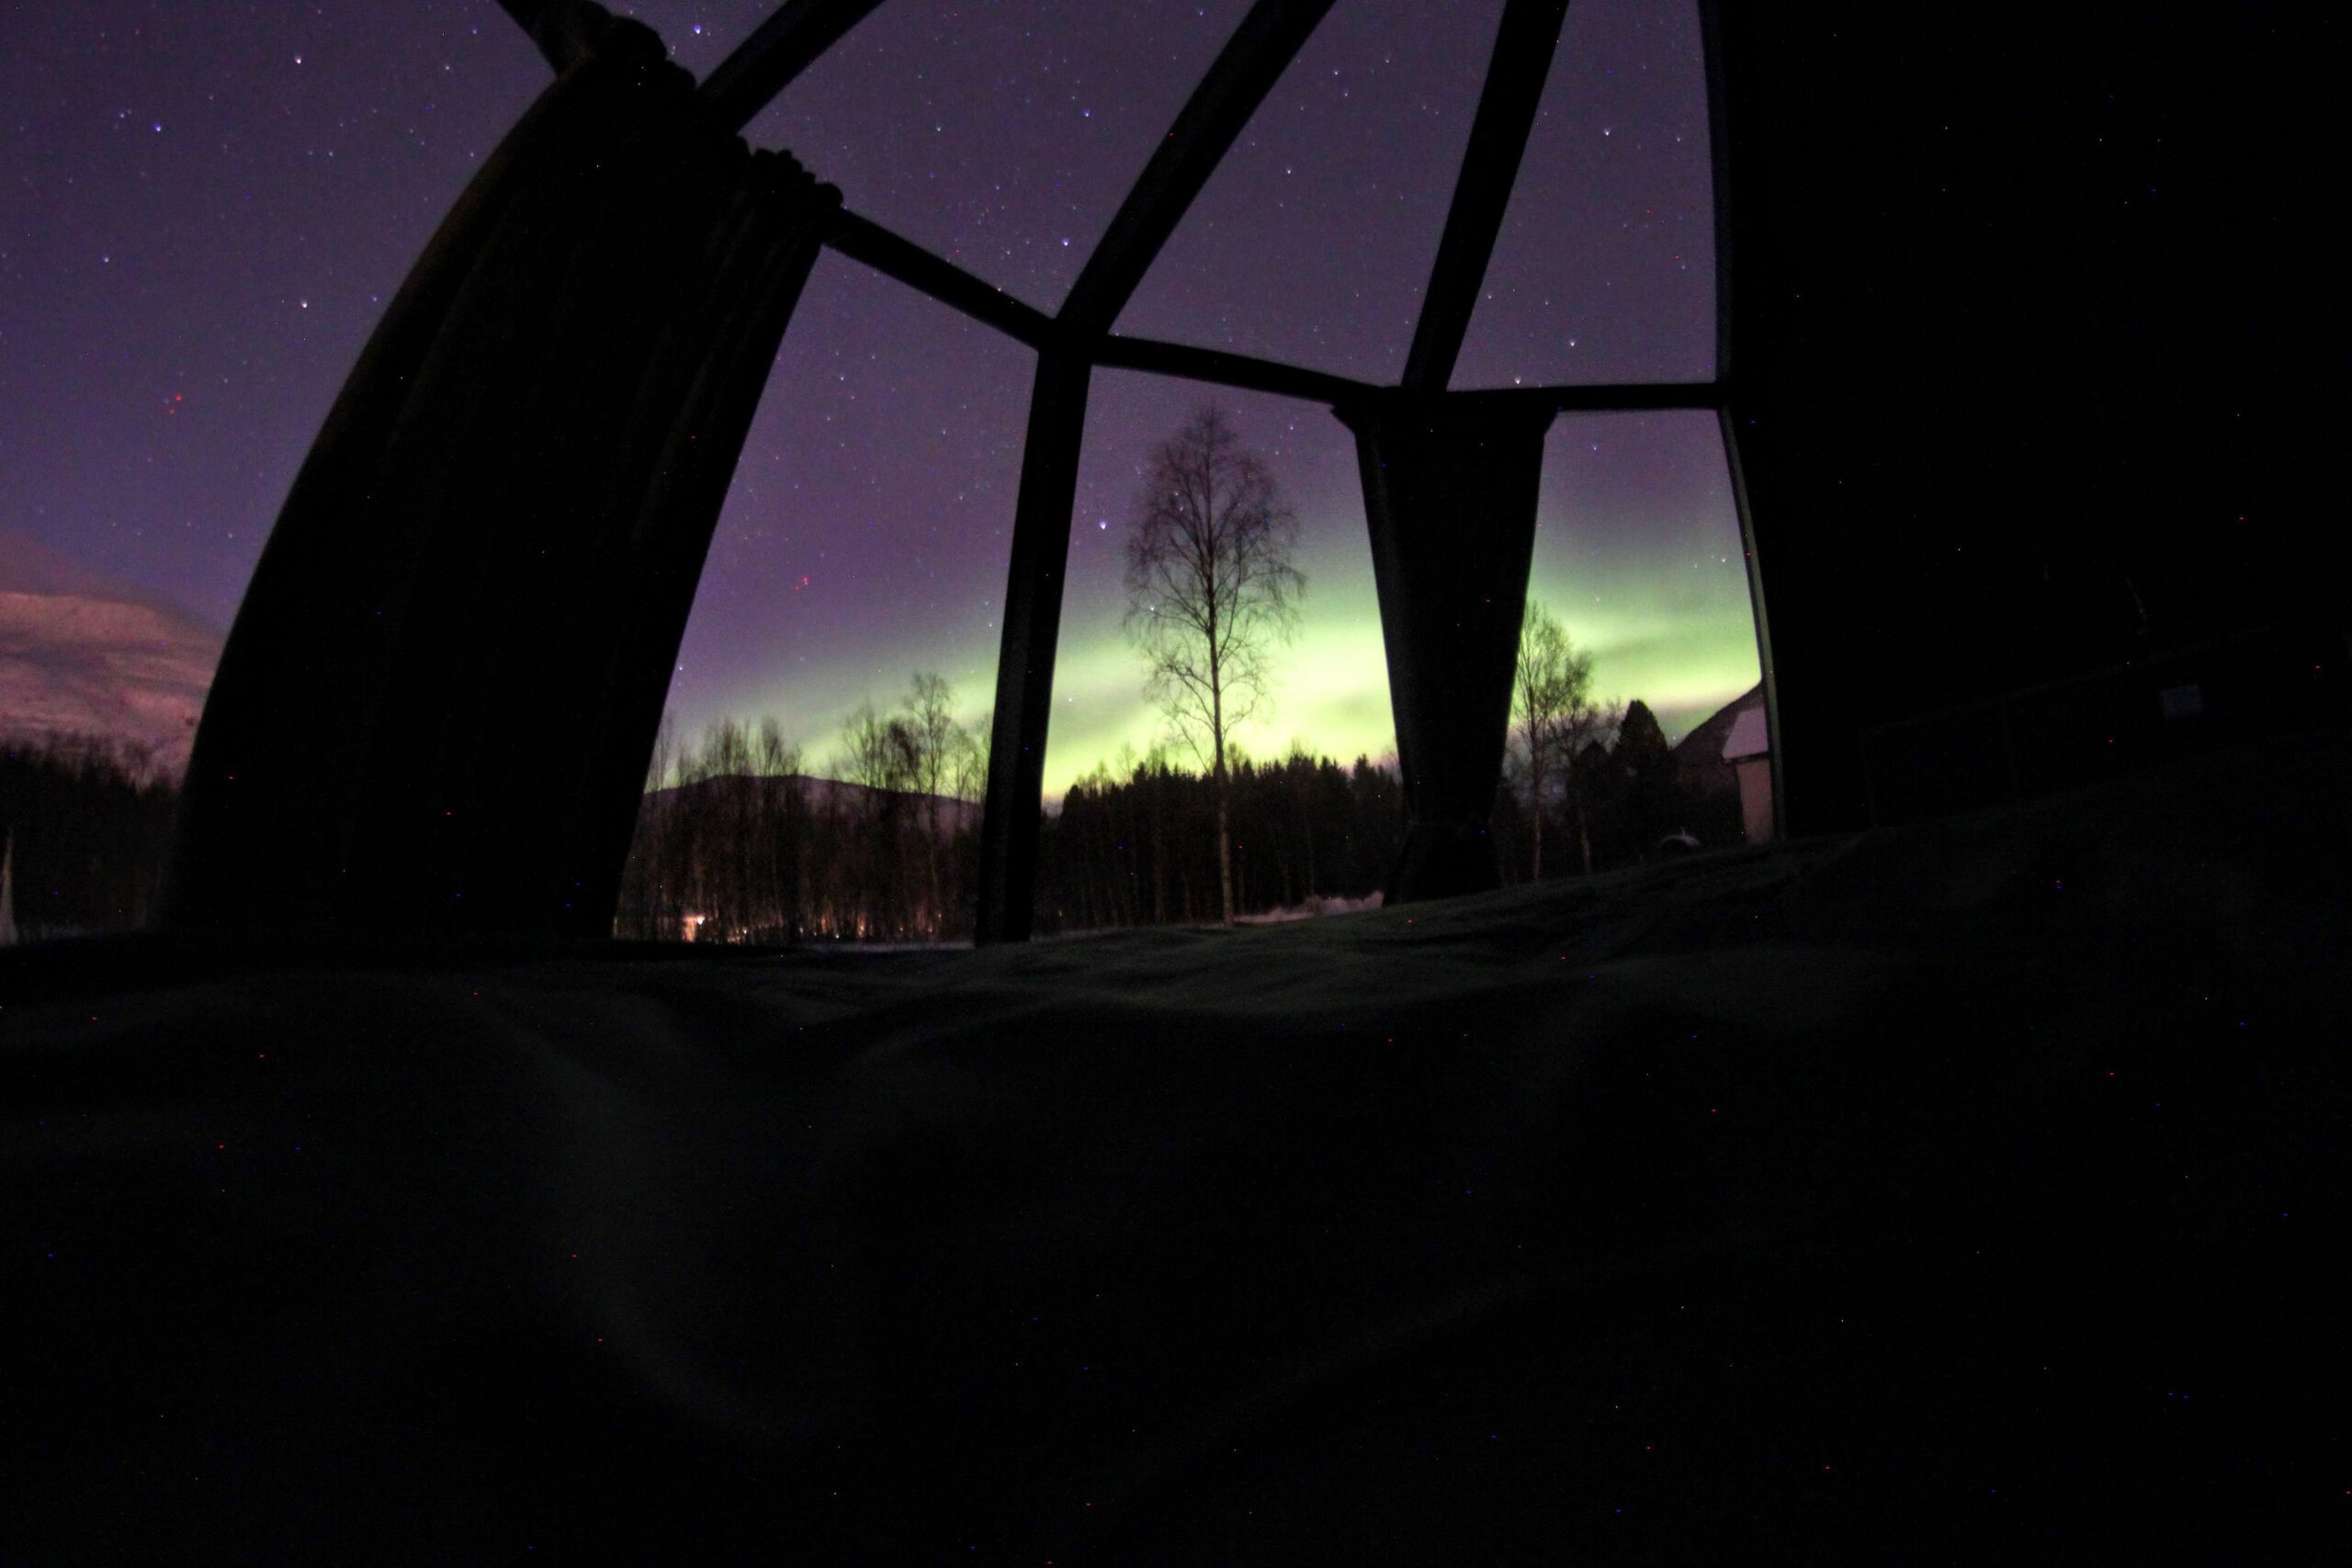 The view outside the aurora hut, a glass view of Northern Lights in the night